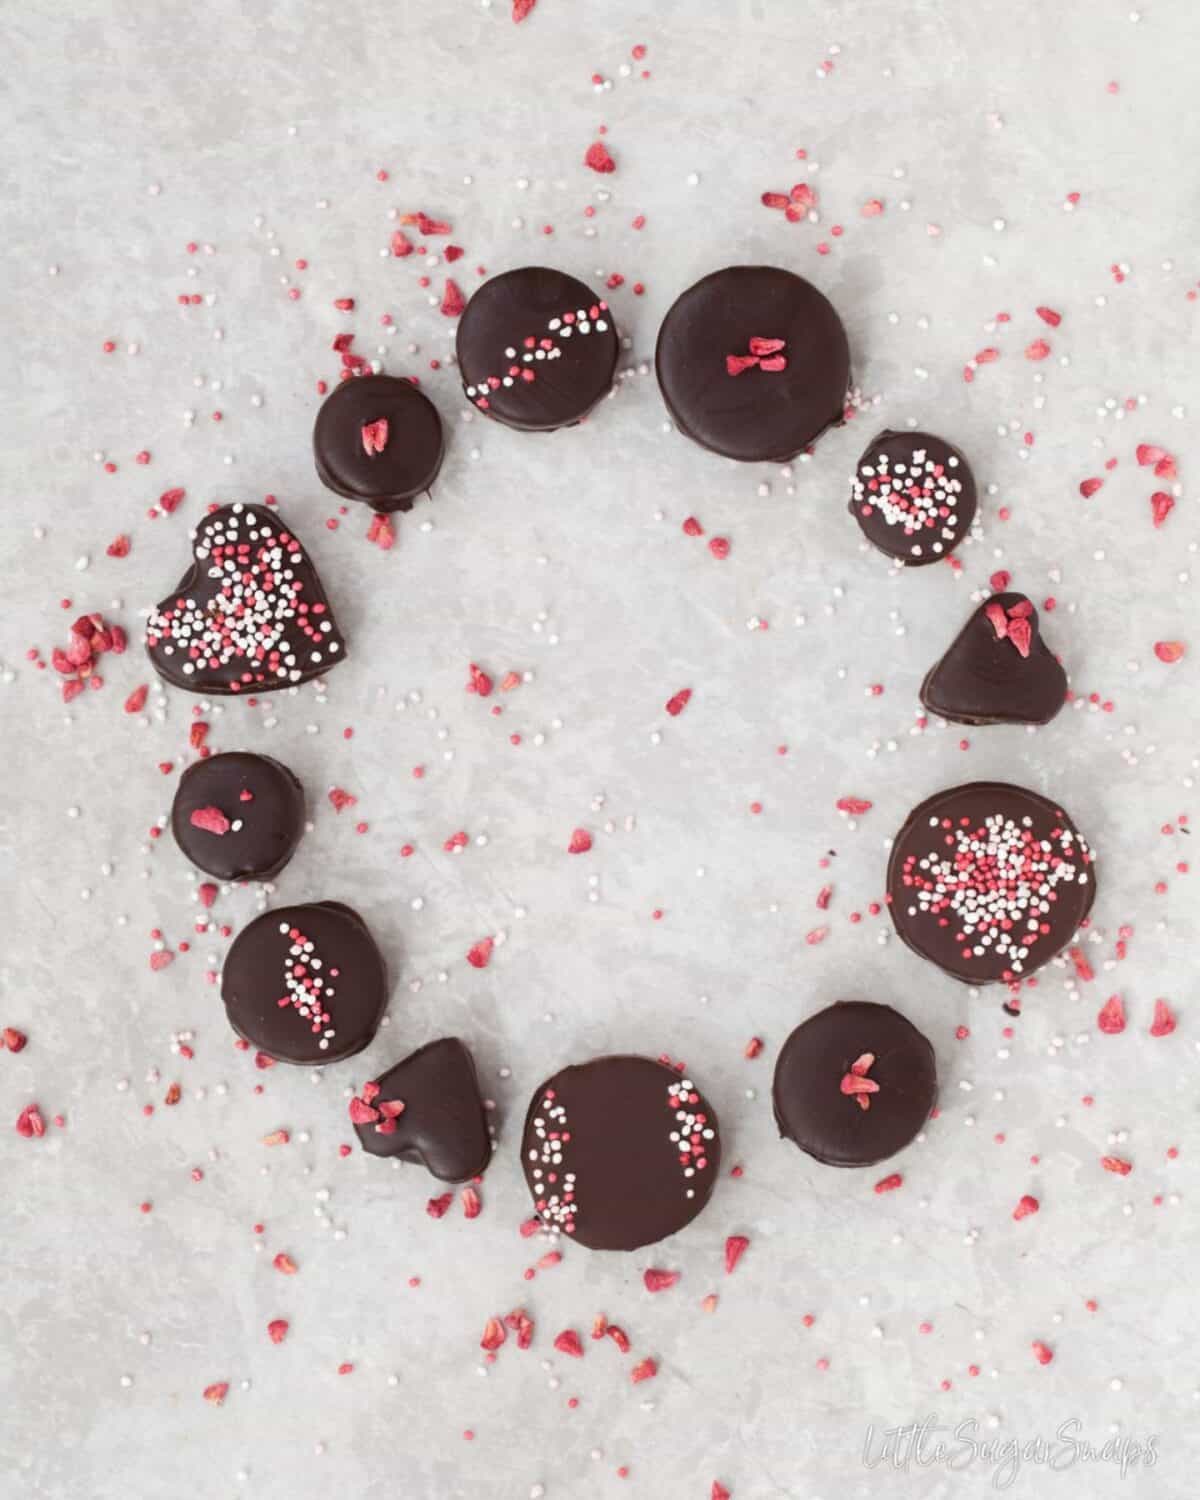 Homemade chocolates decorated with sprinkles and arranged in a circle.